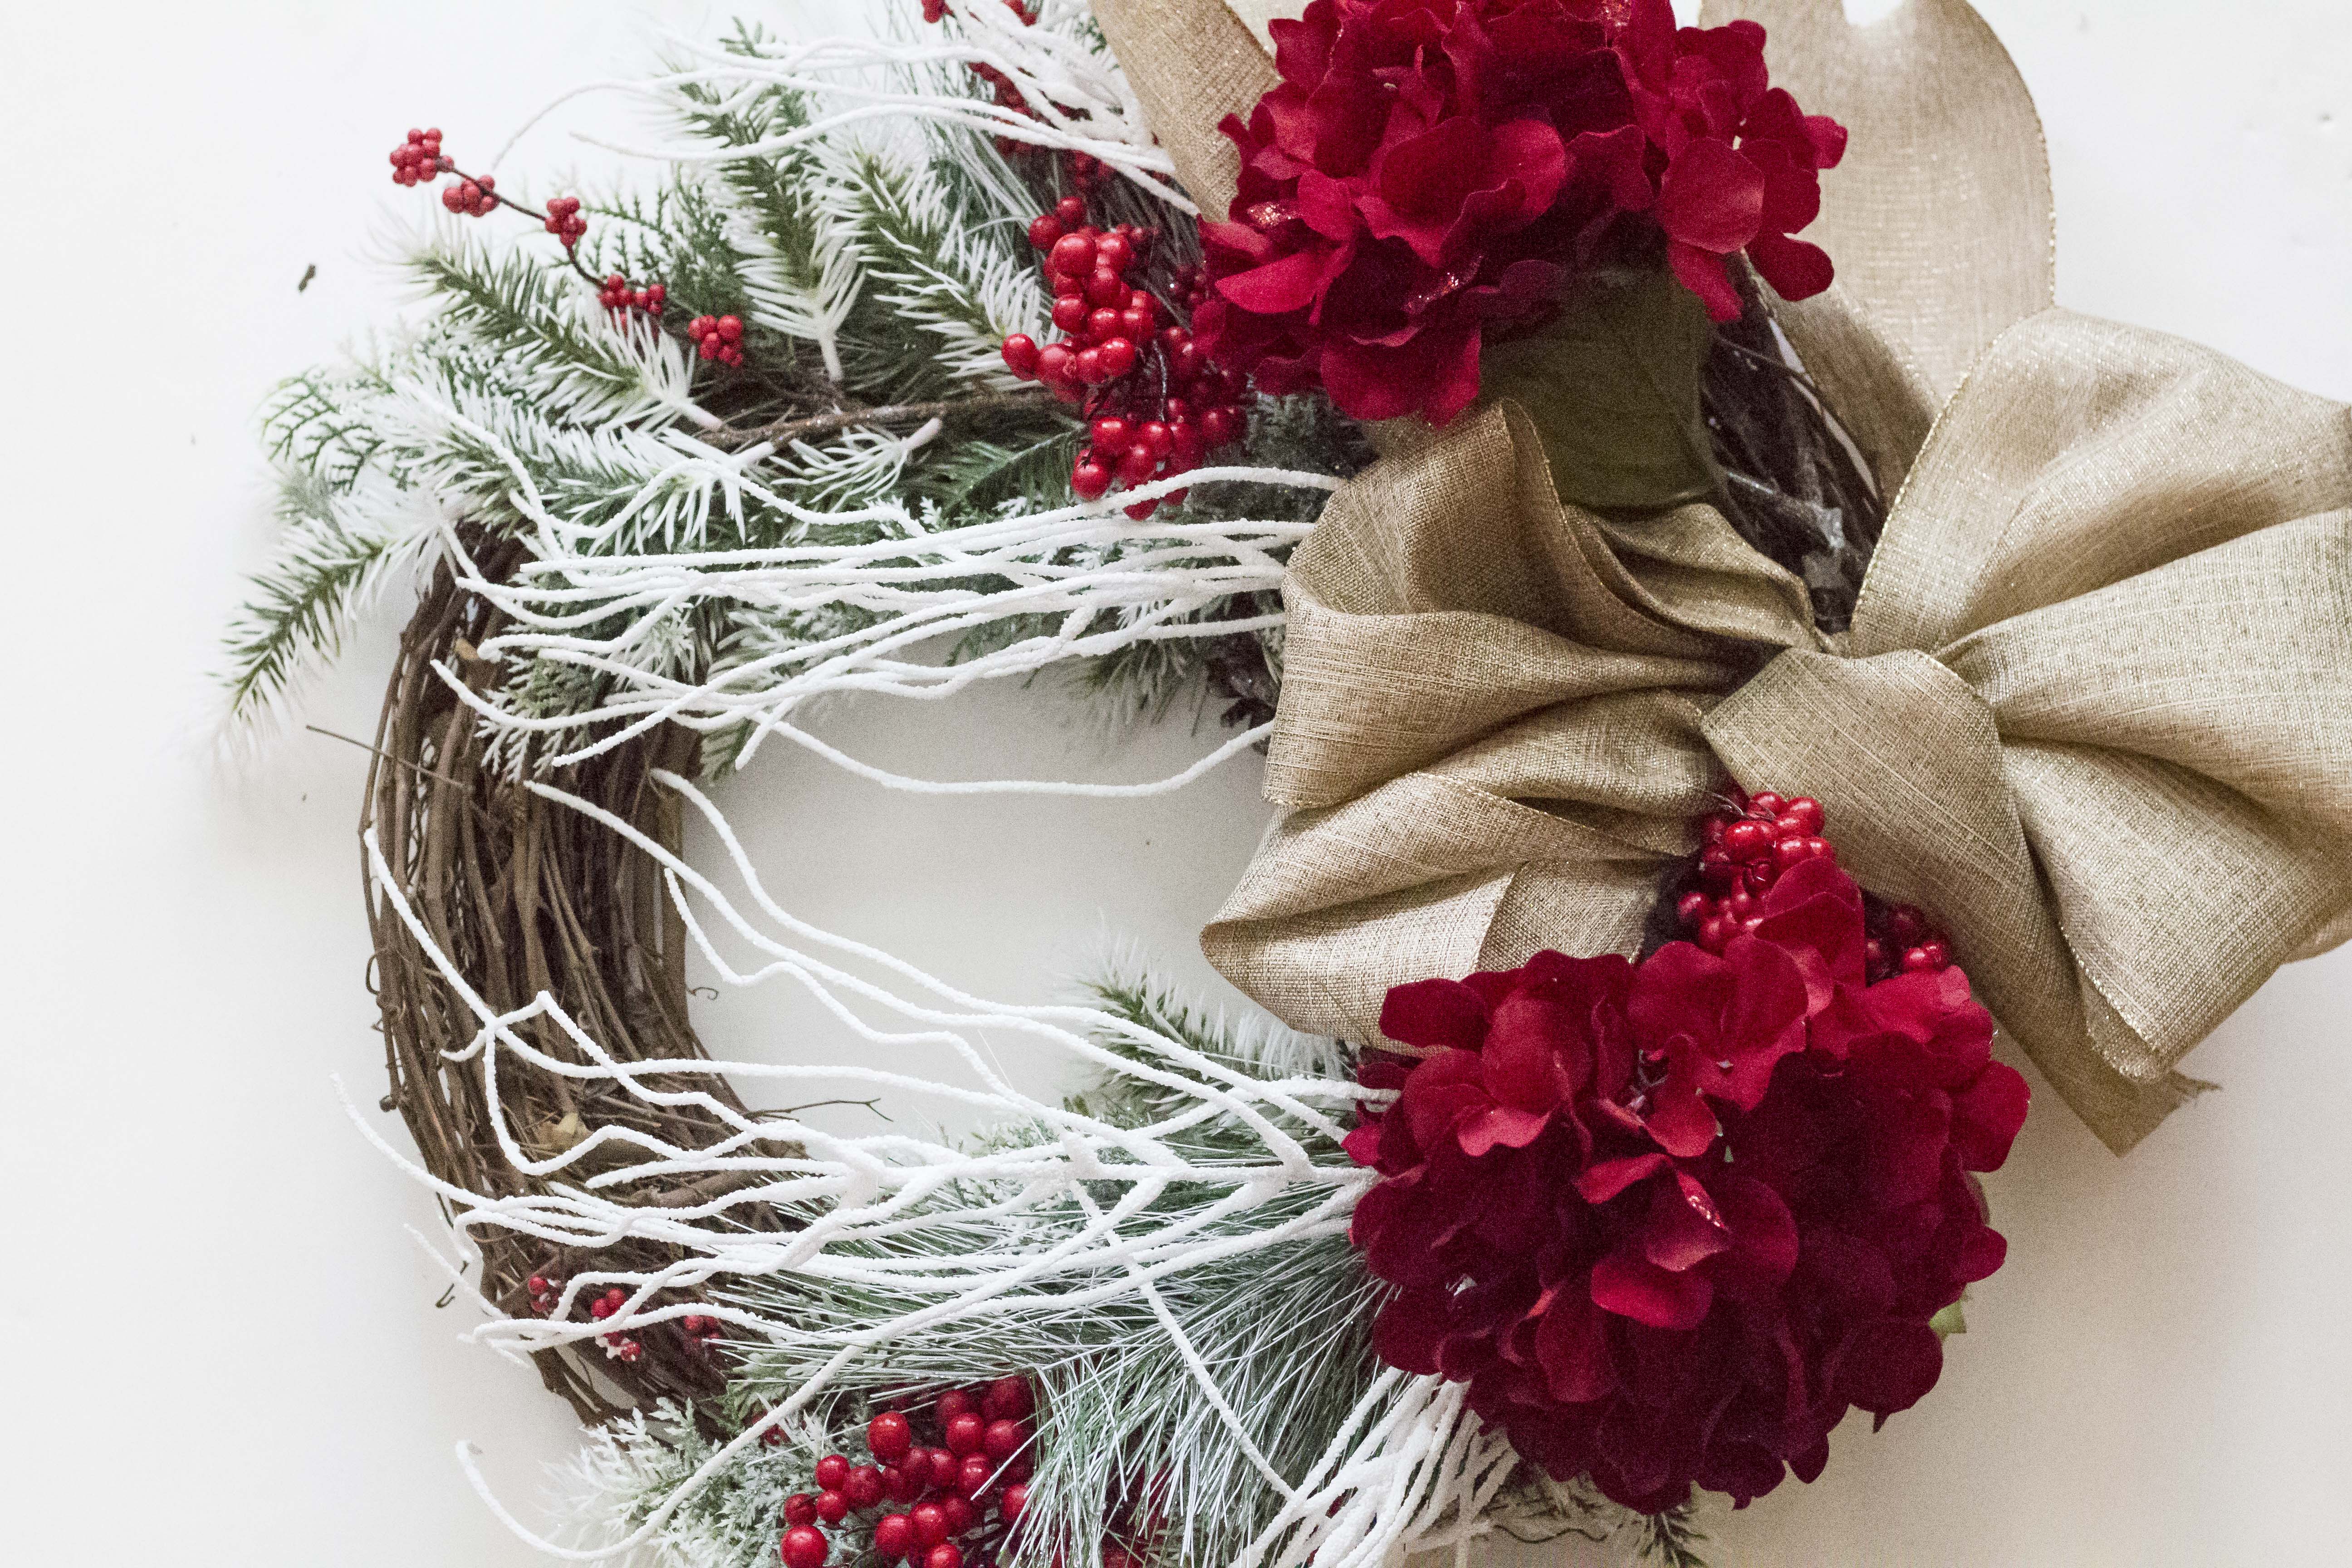 Try this Red and White Christmas wreath tutorial